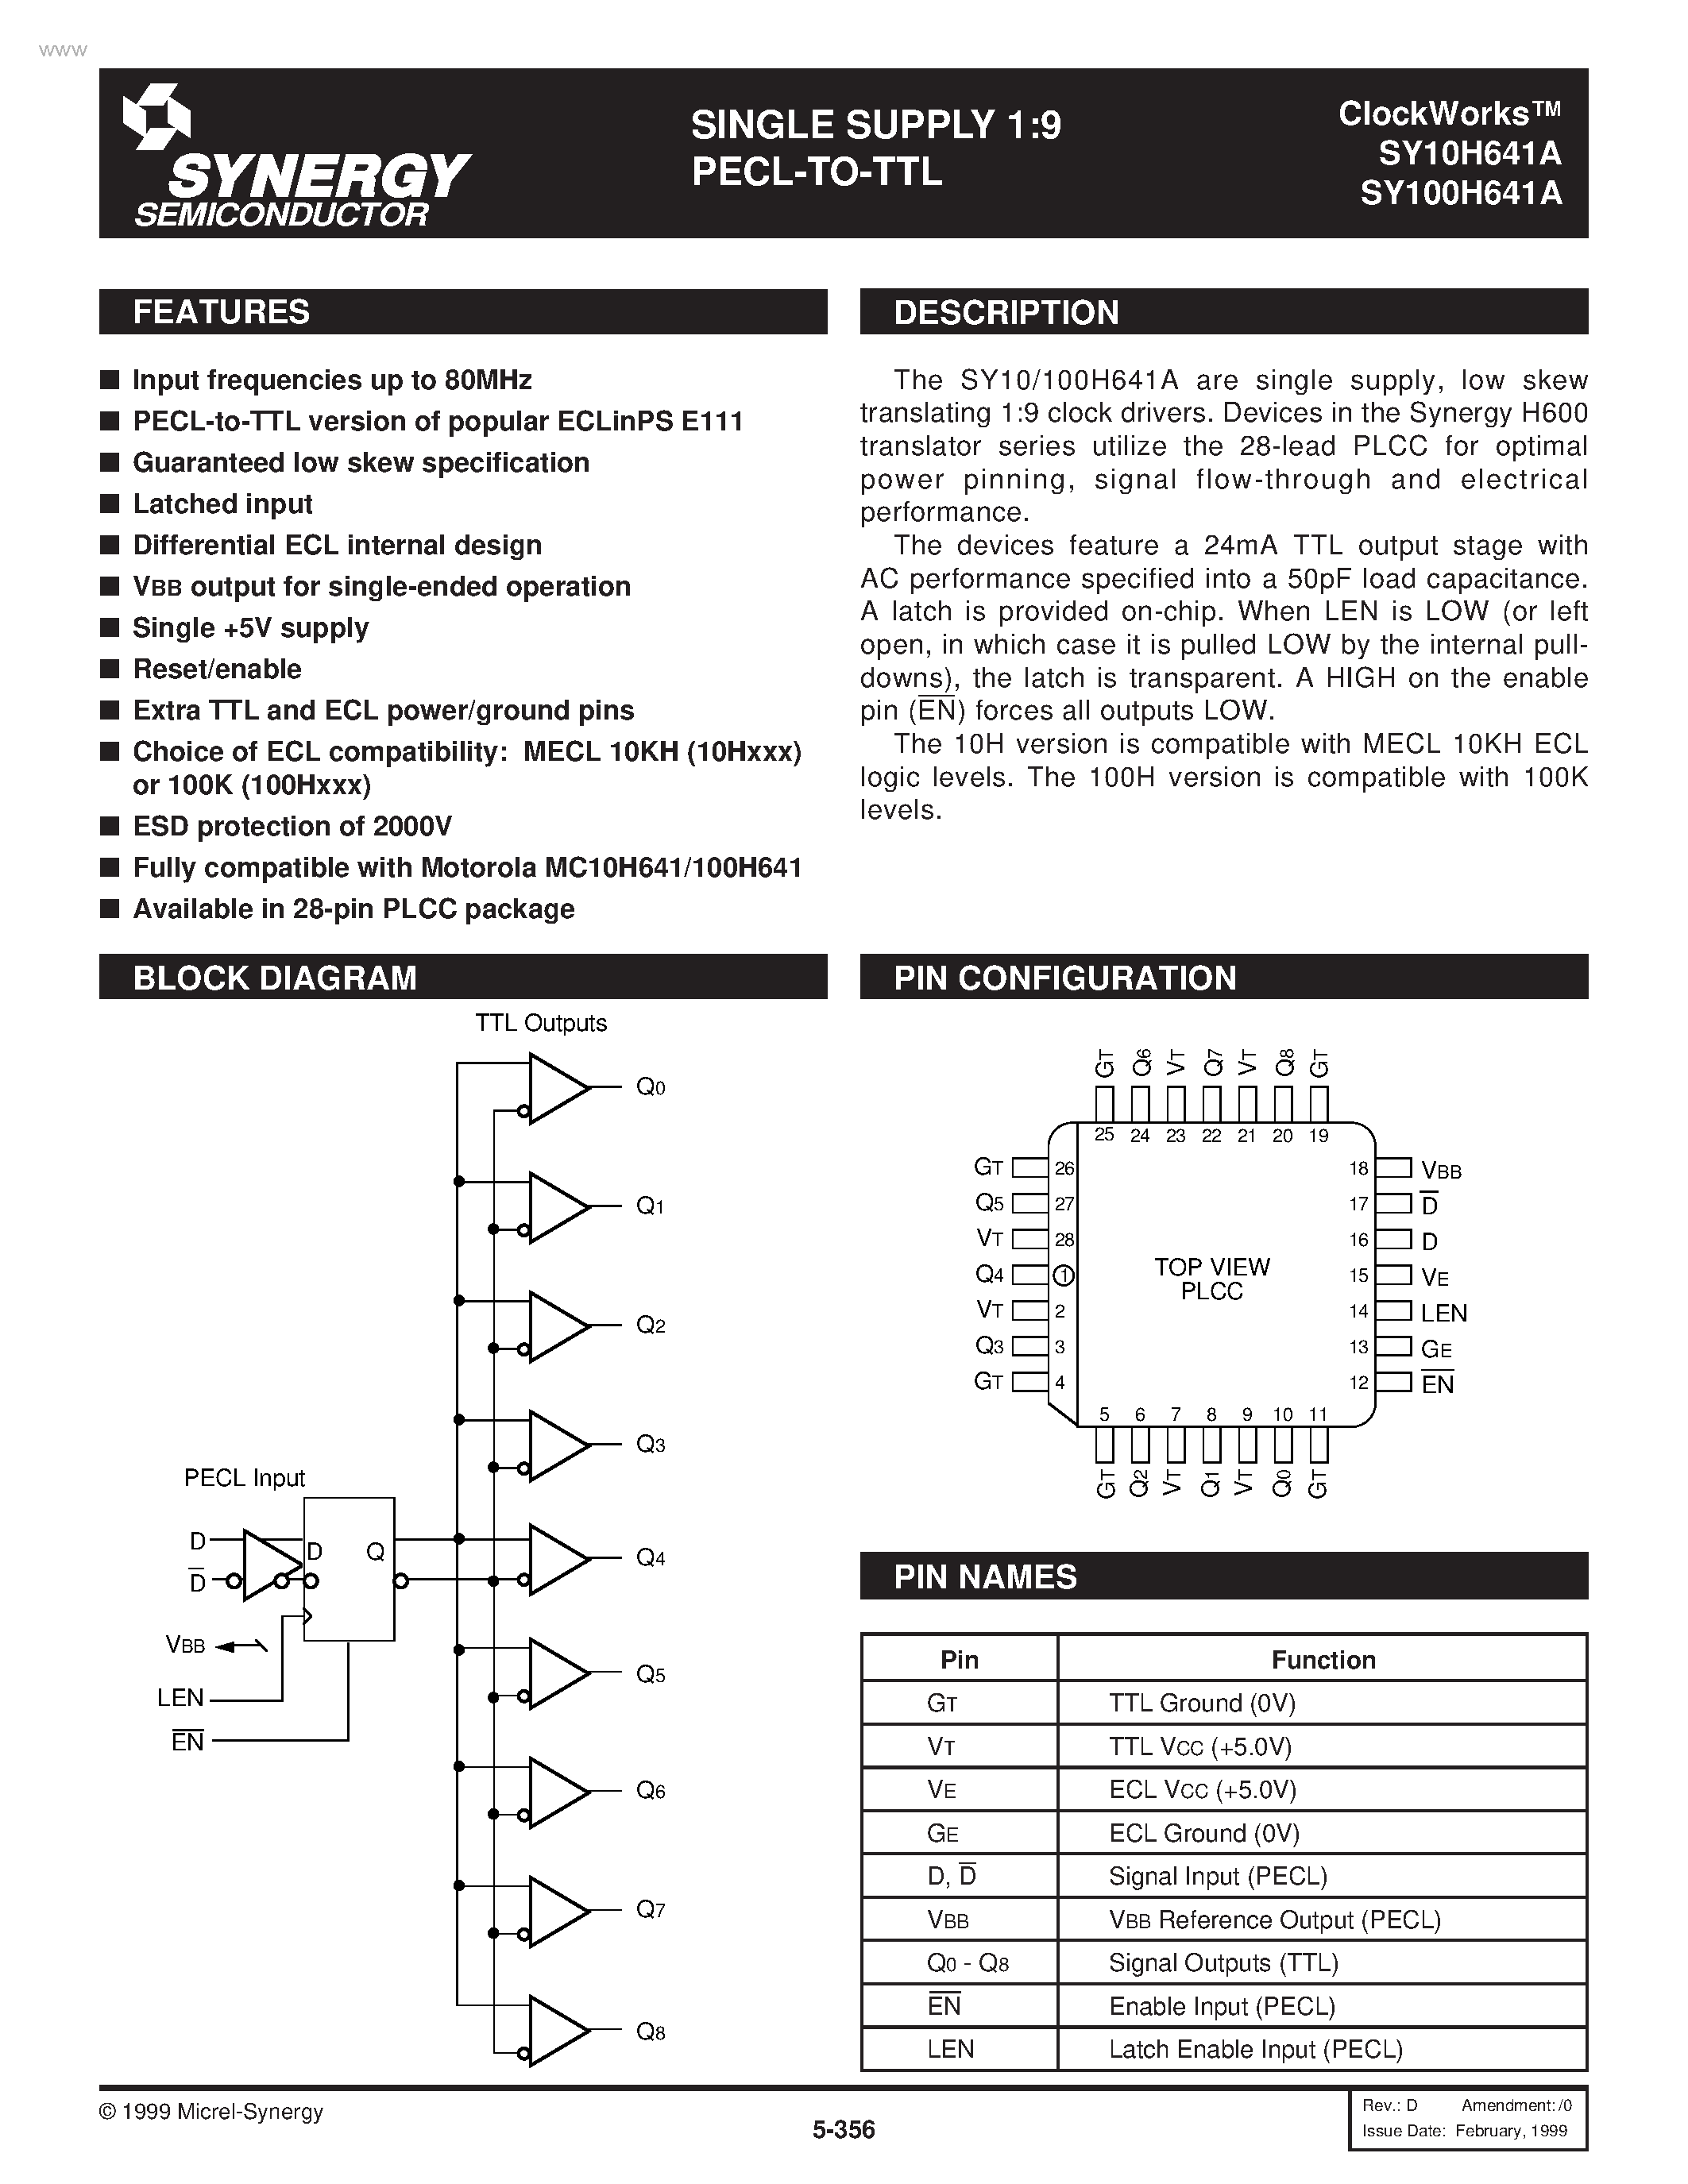 Datasheet SY100H641A - SINGLE SUPPLY 1:9 PECL-TO-TTL page 1